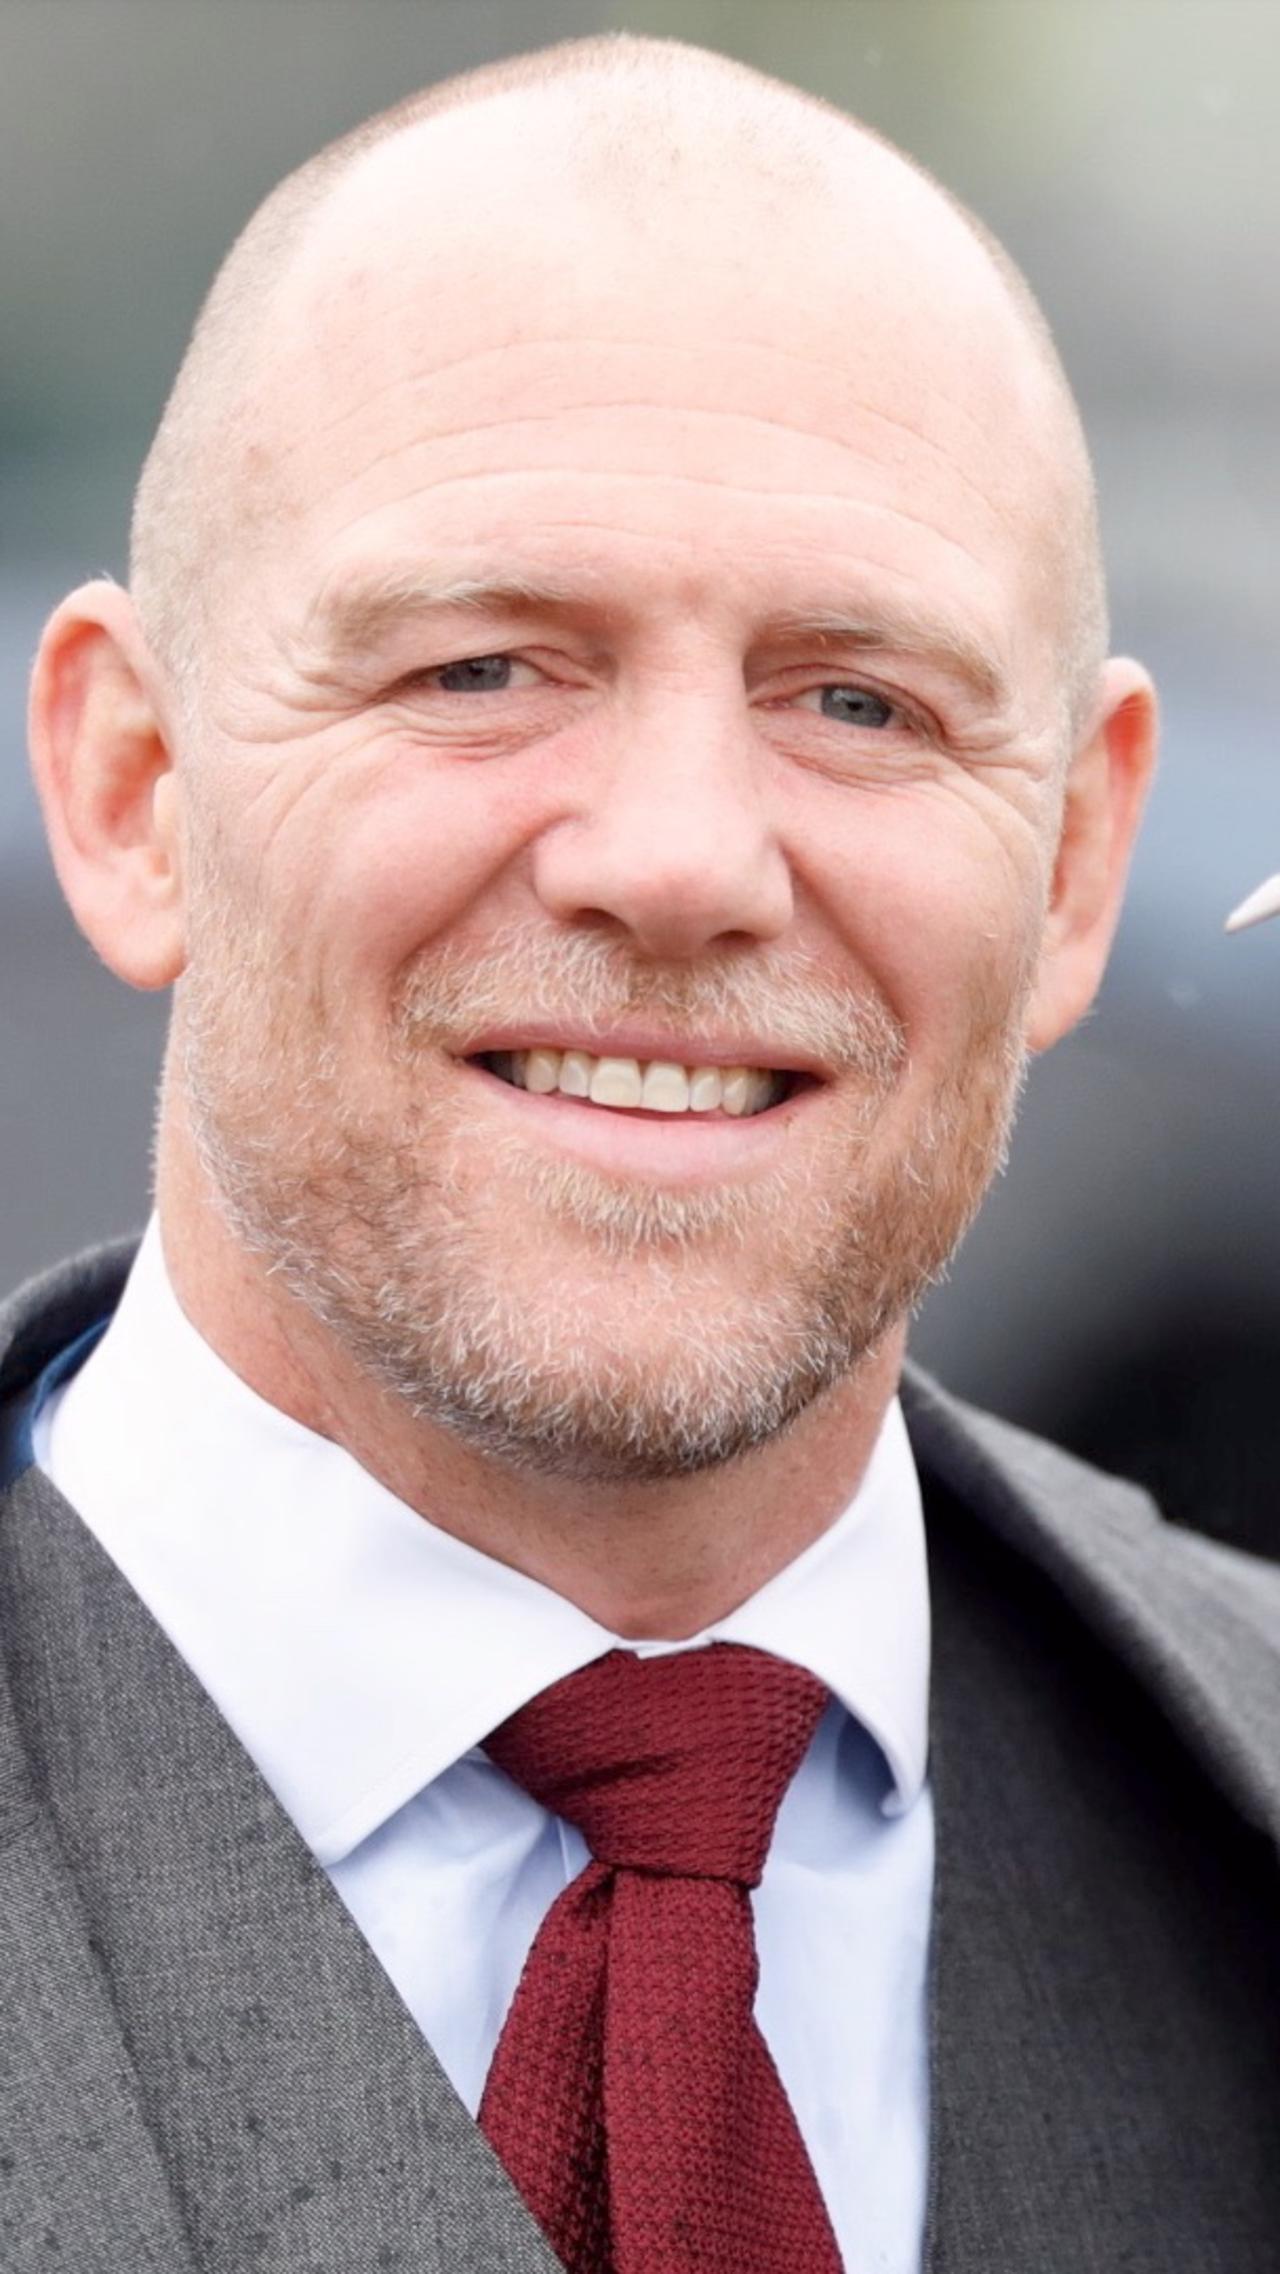 Mike Tindall Didn’t Chair-ish His Coronation Seat